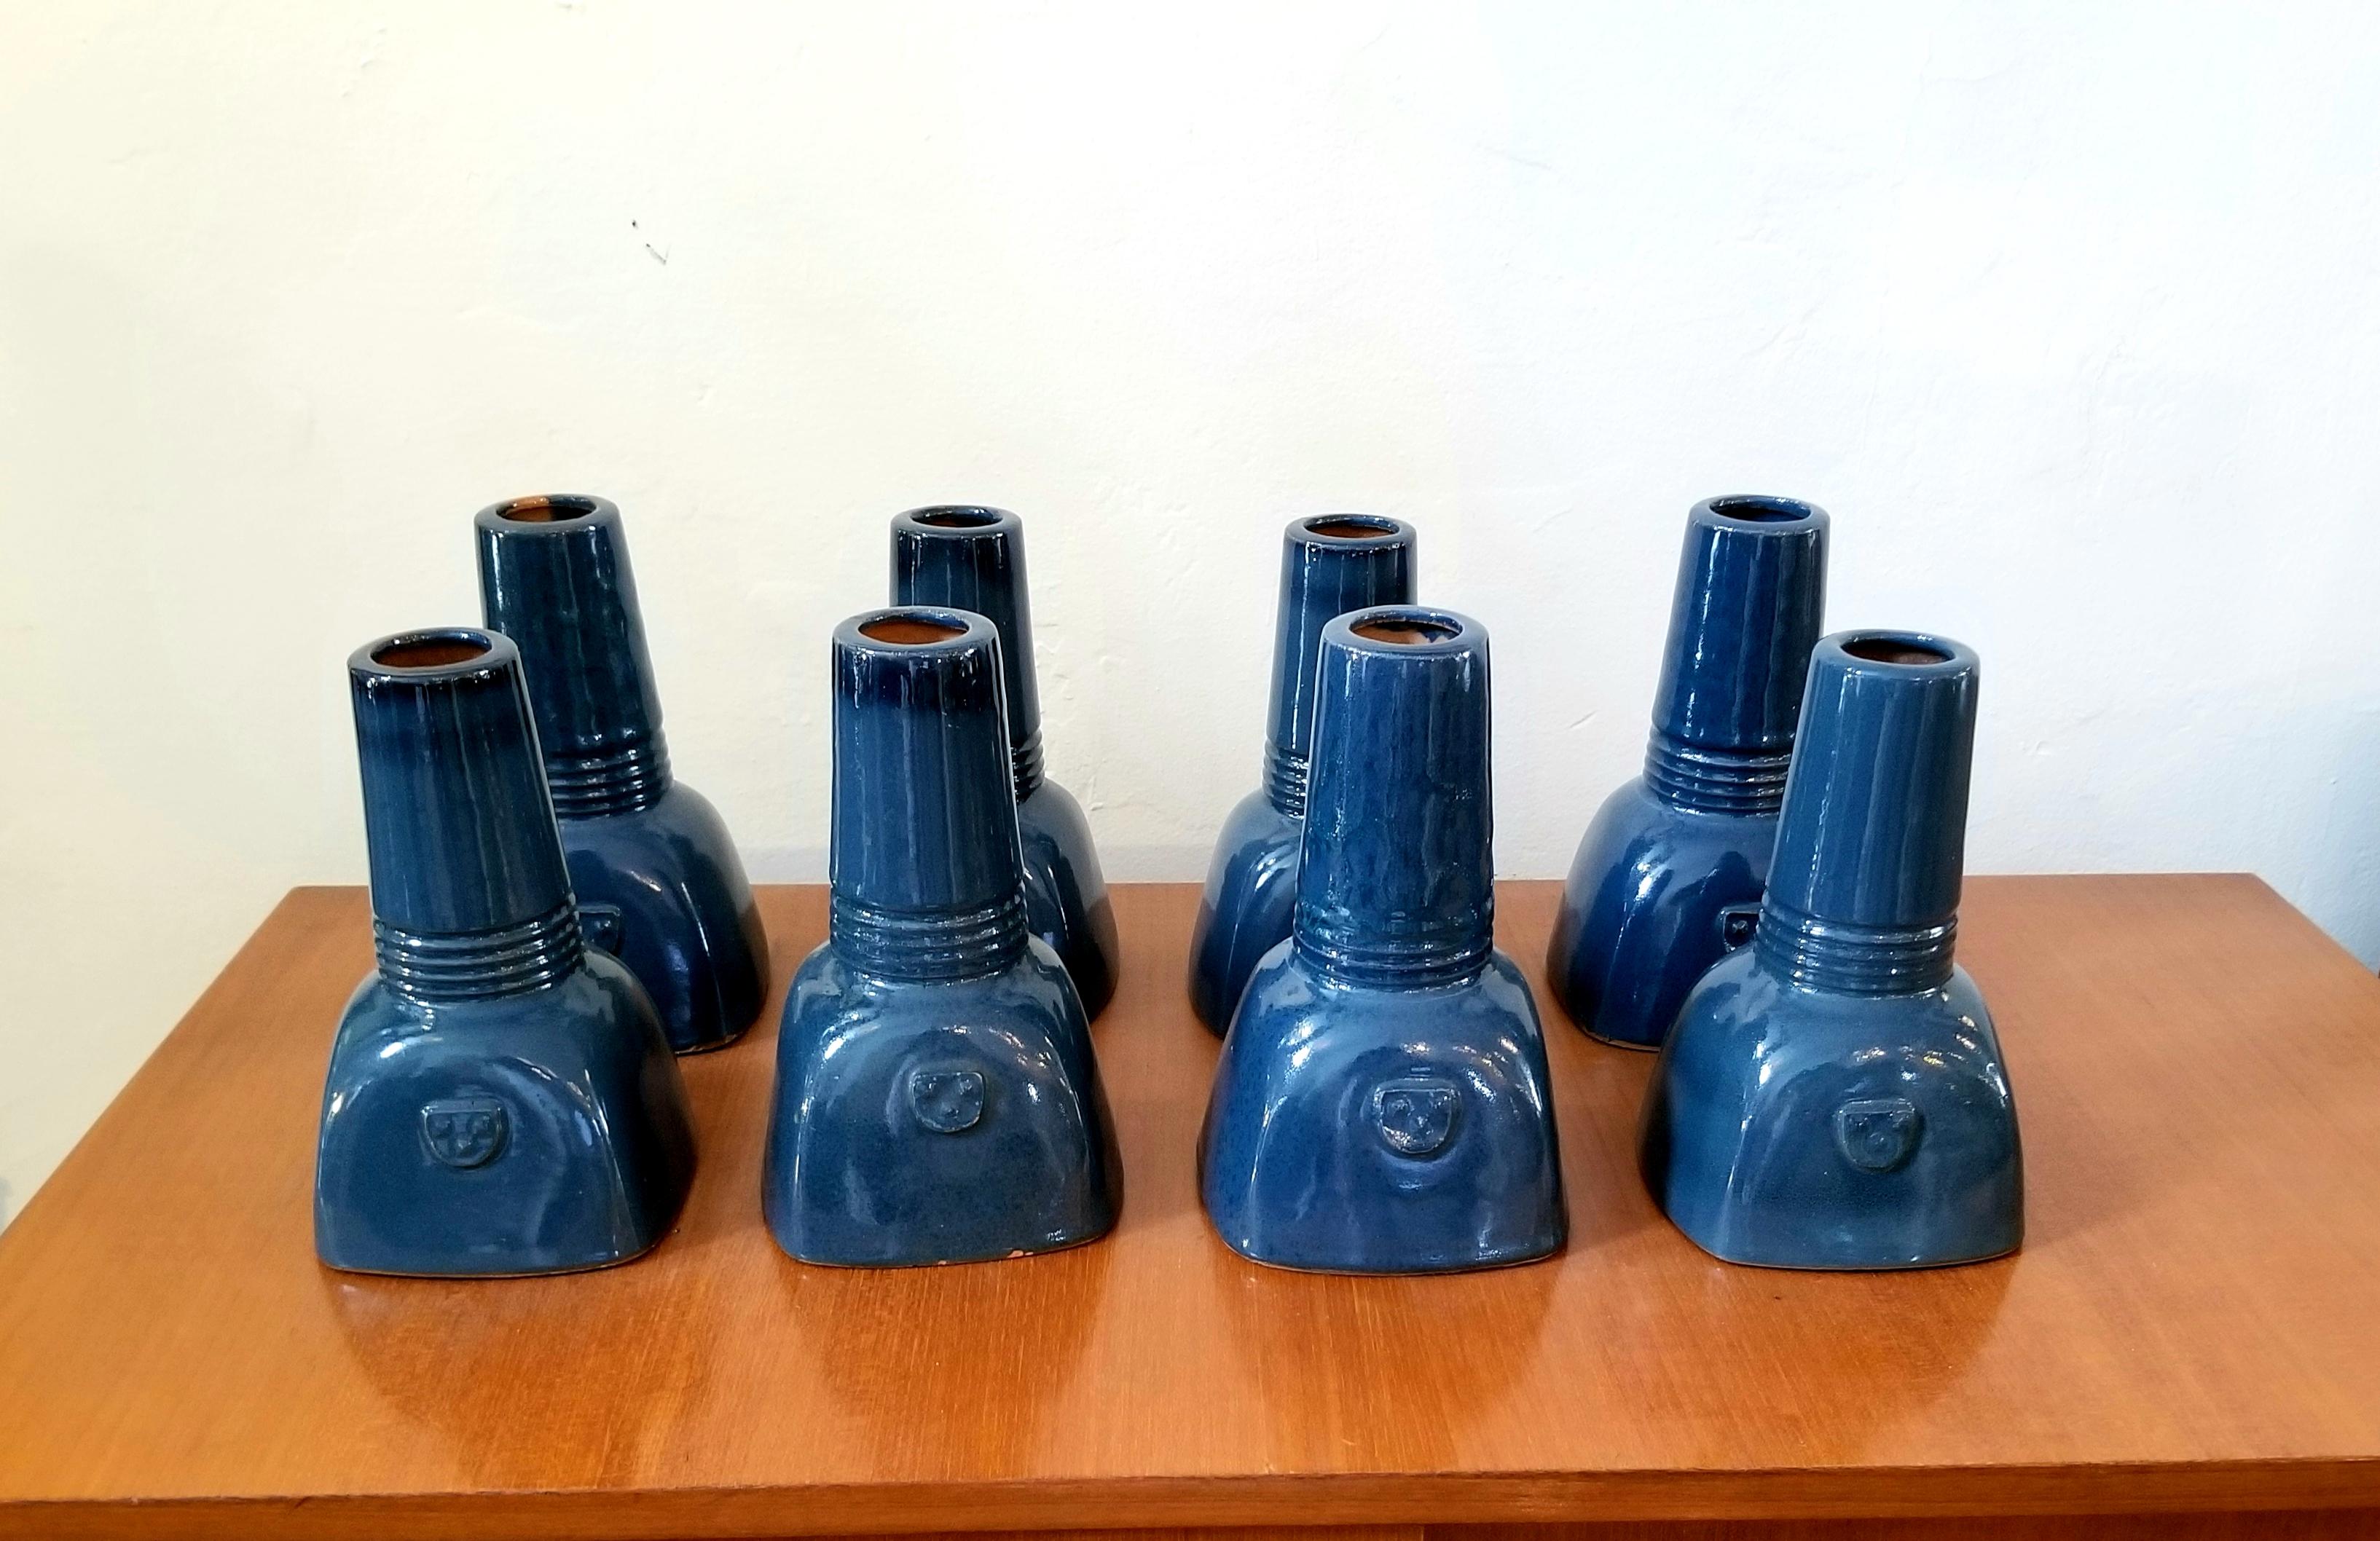 Set of eight sculpture vases. Each vase is hand colored shaped and sized. Vases can use for the flowers. We have 4 more vases like this.